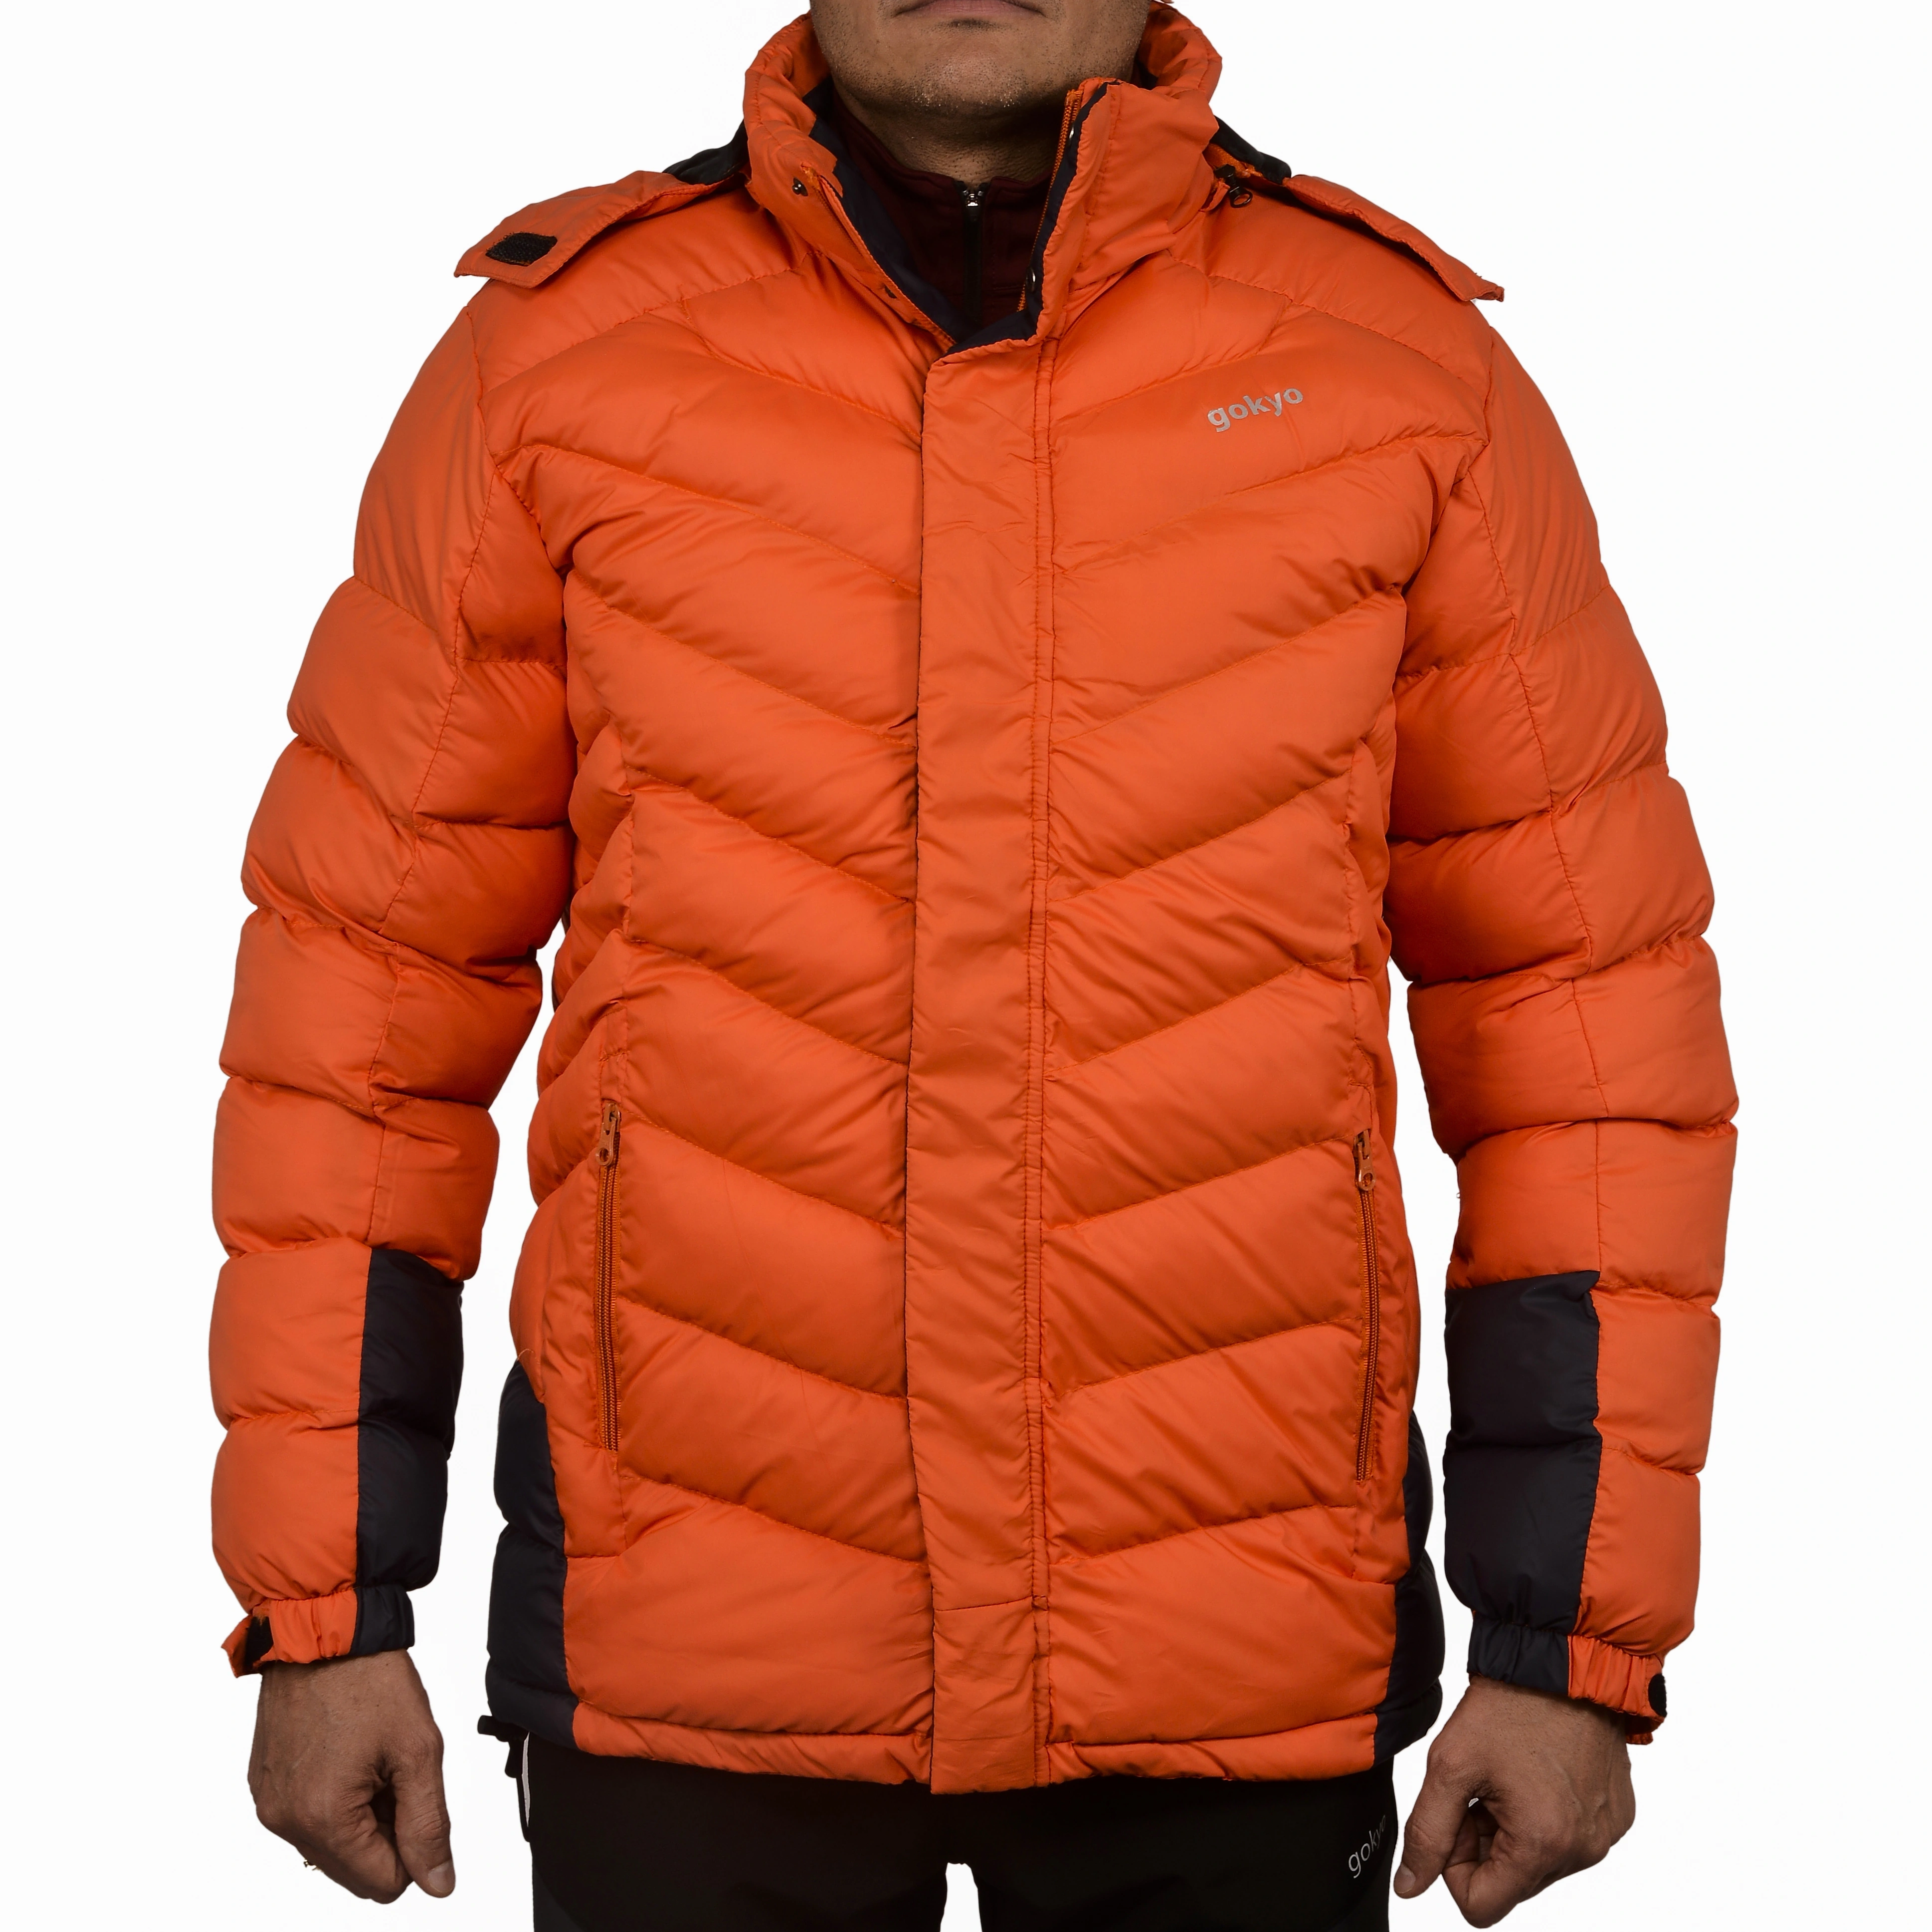 K2 Survivor Down Jacket for Men: Stylized Functionality for Extreme Cold Weather Expeditions (Up to -20°C)-230107